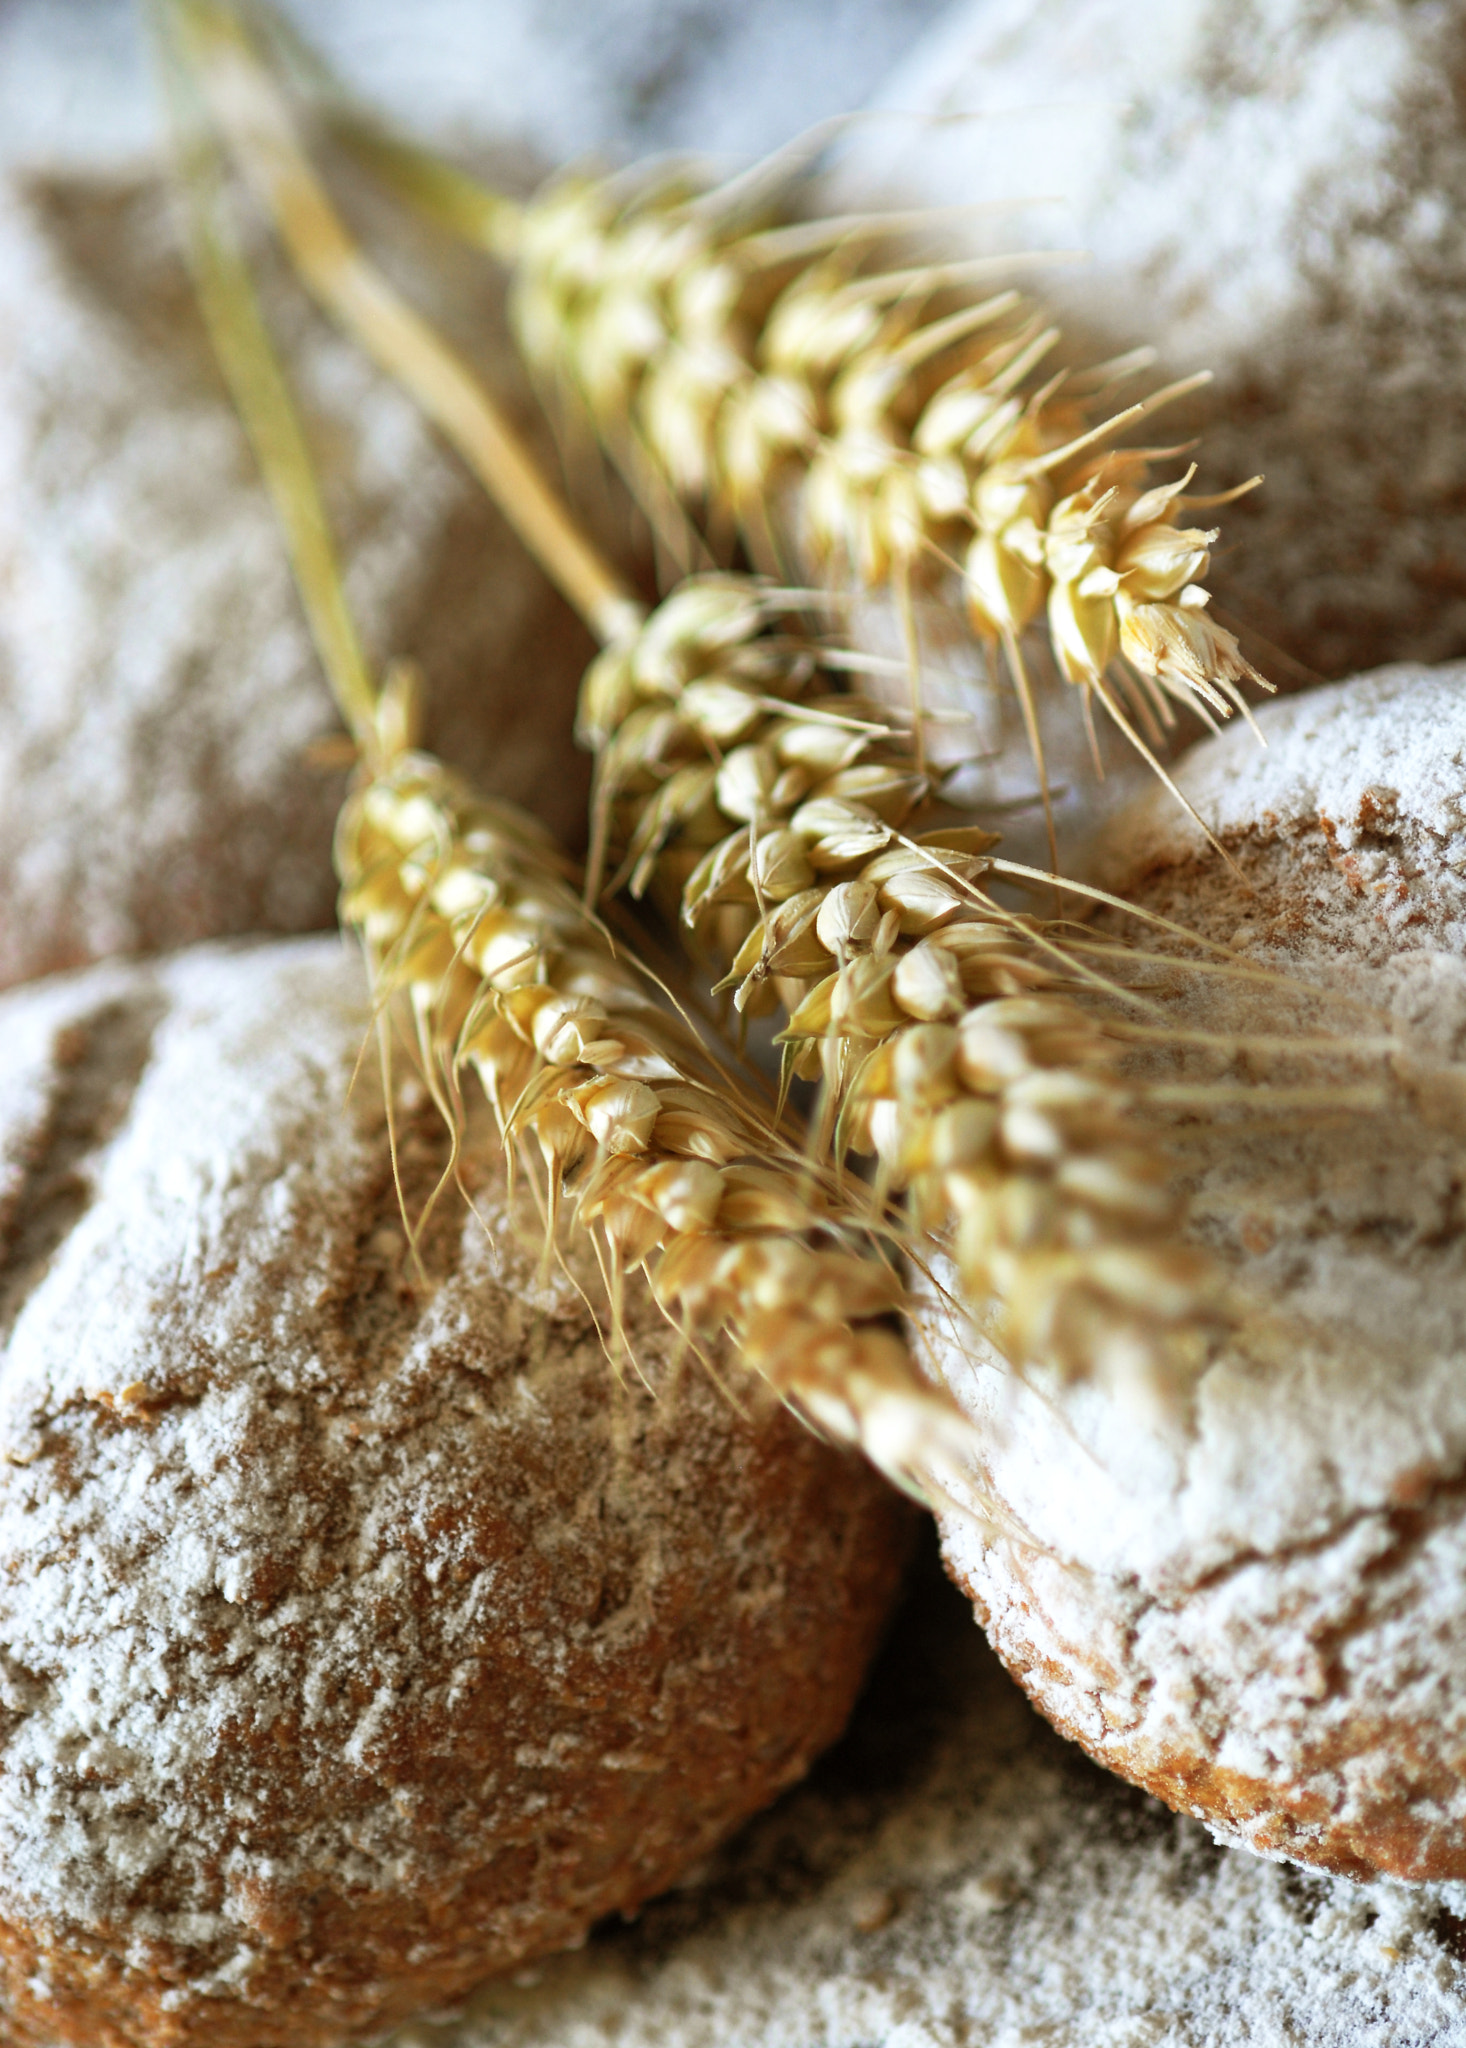 Nikon D200 + Nikon AF-S Micro-Nikkor 105mm F2.8G IF-ED VR sample photo. Organic bread with cereals and wheat photography